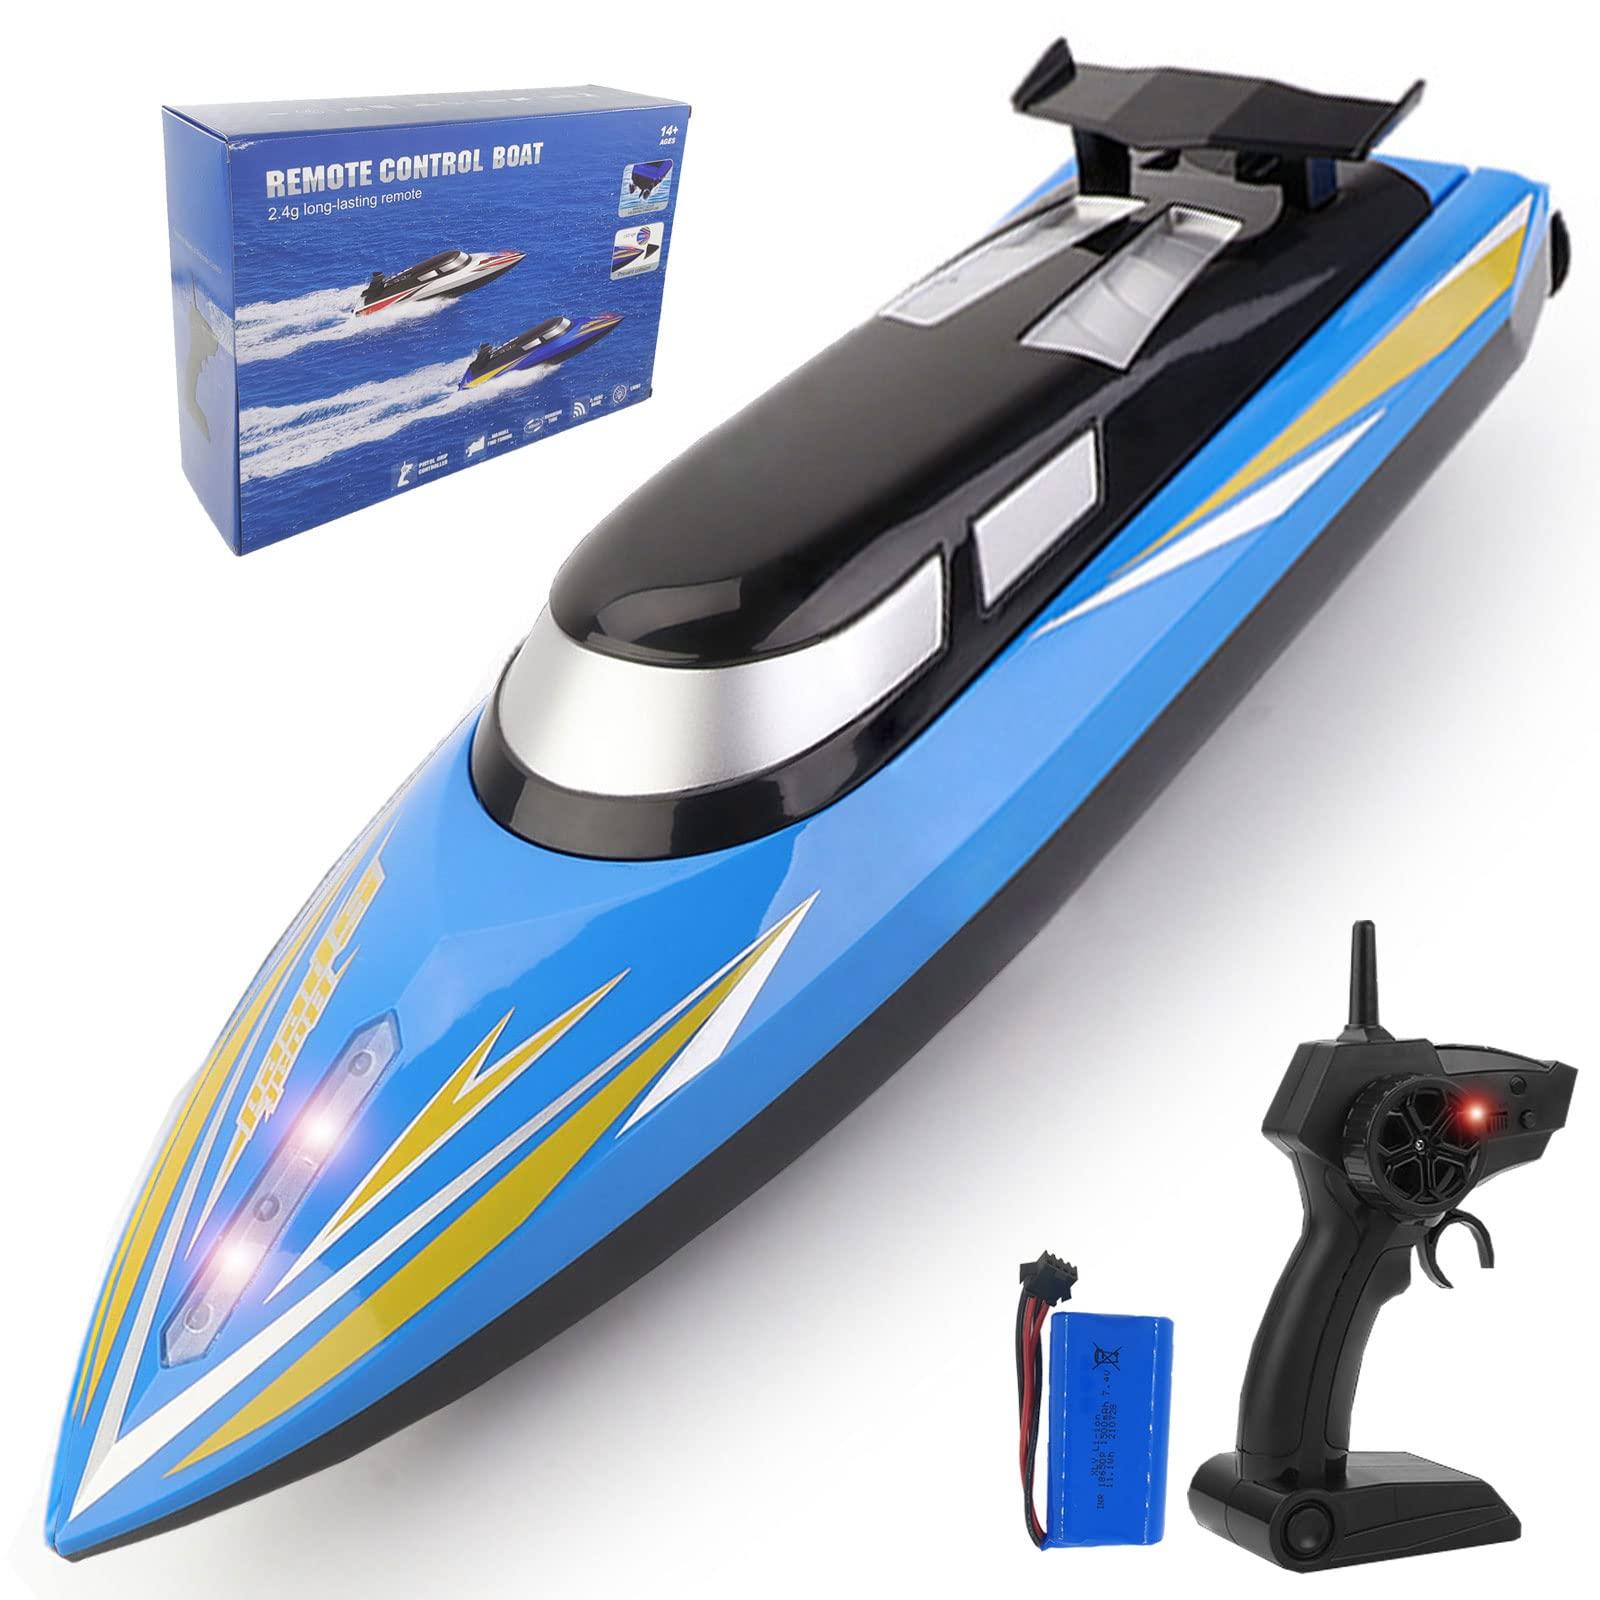 Rc Power Boats For Sale: Choosing the Right RC Power Boat for Your Needs